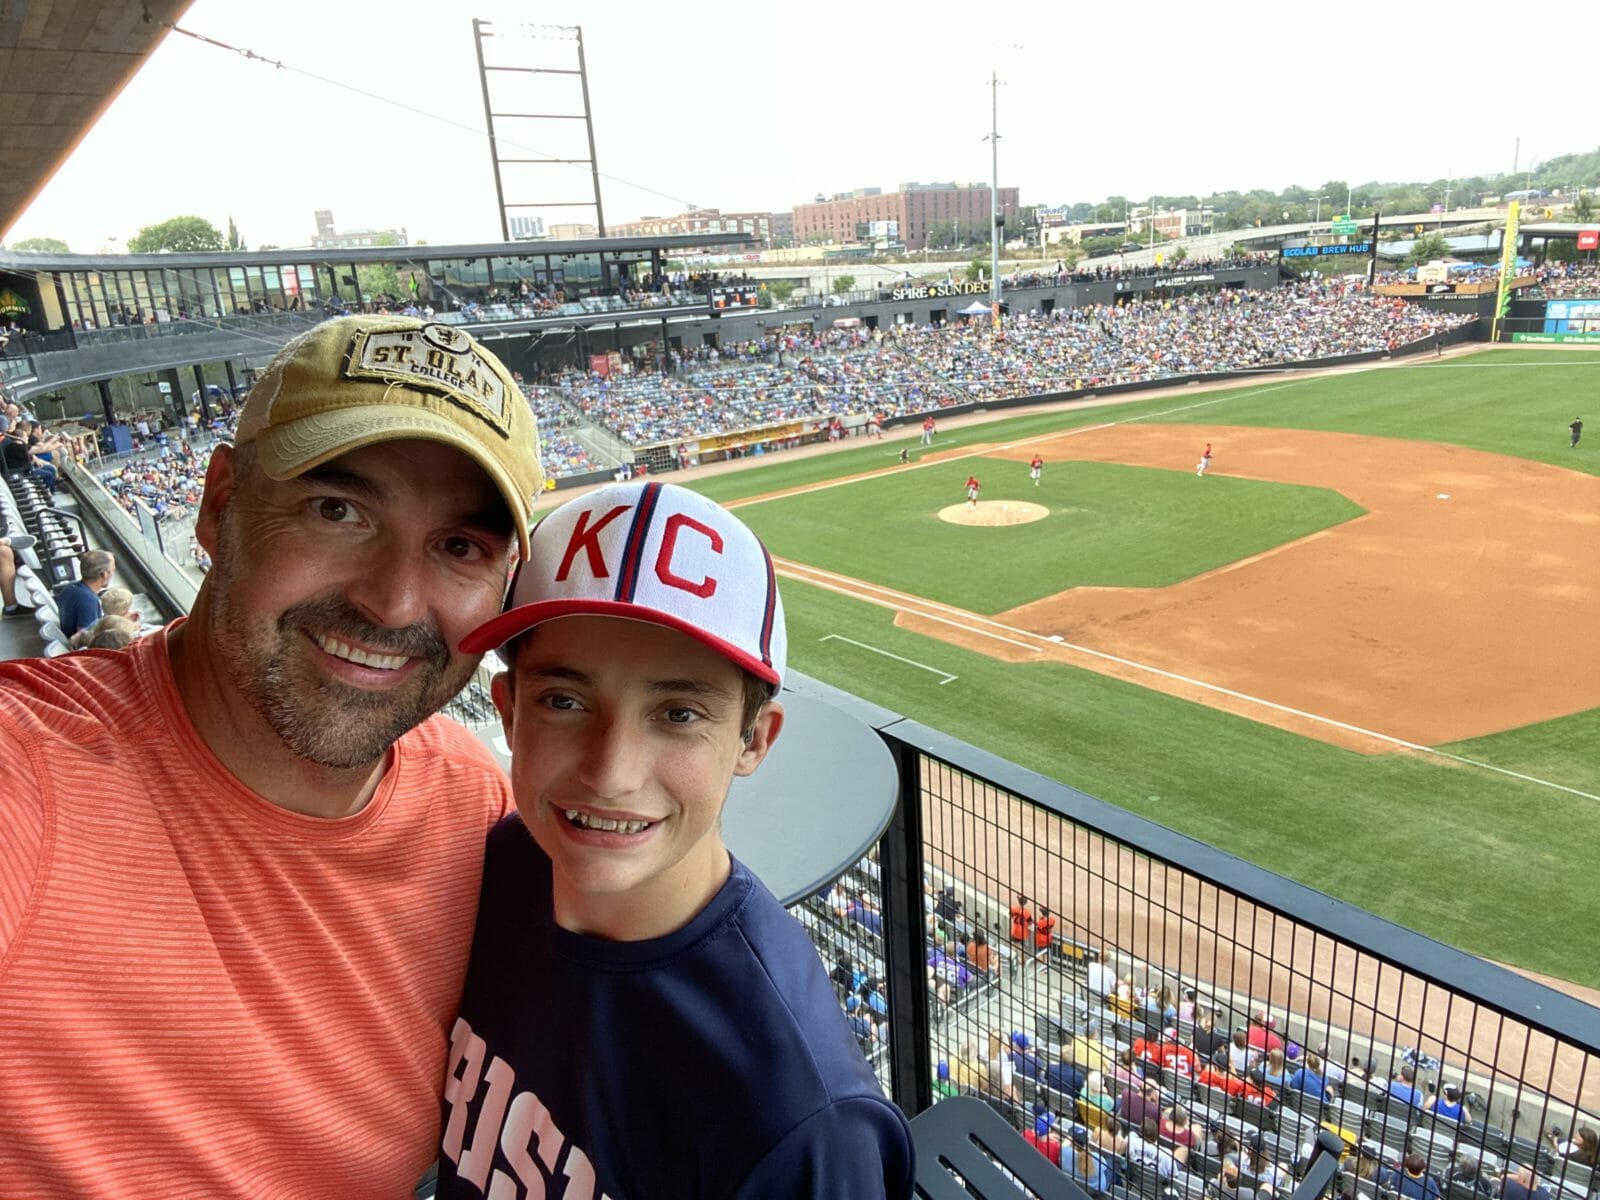 Chris and son Mason smiling for selfie at a baseball game